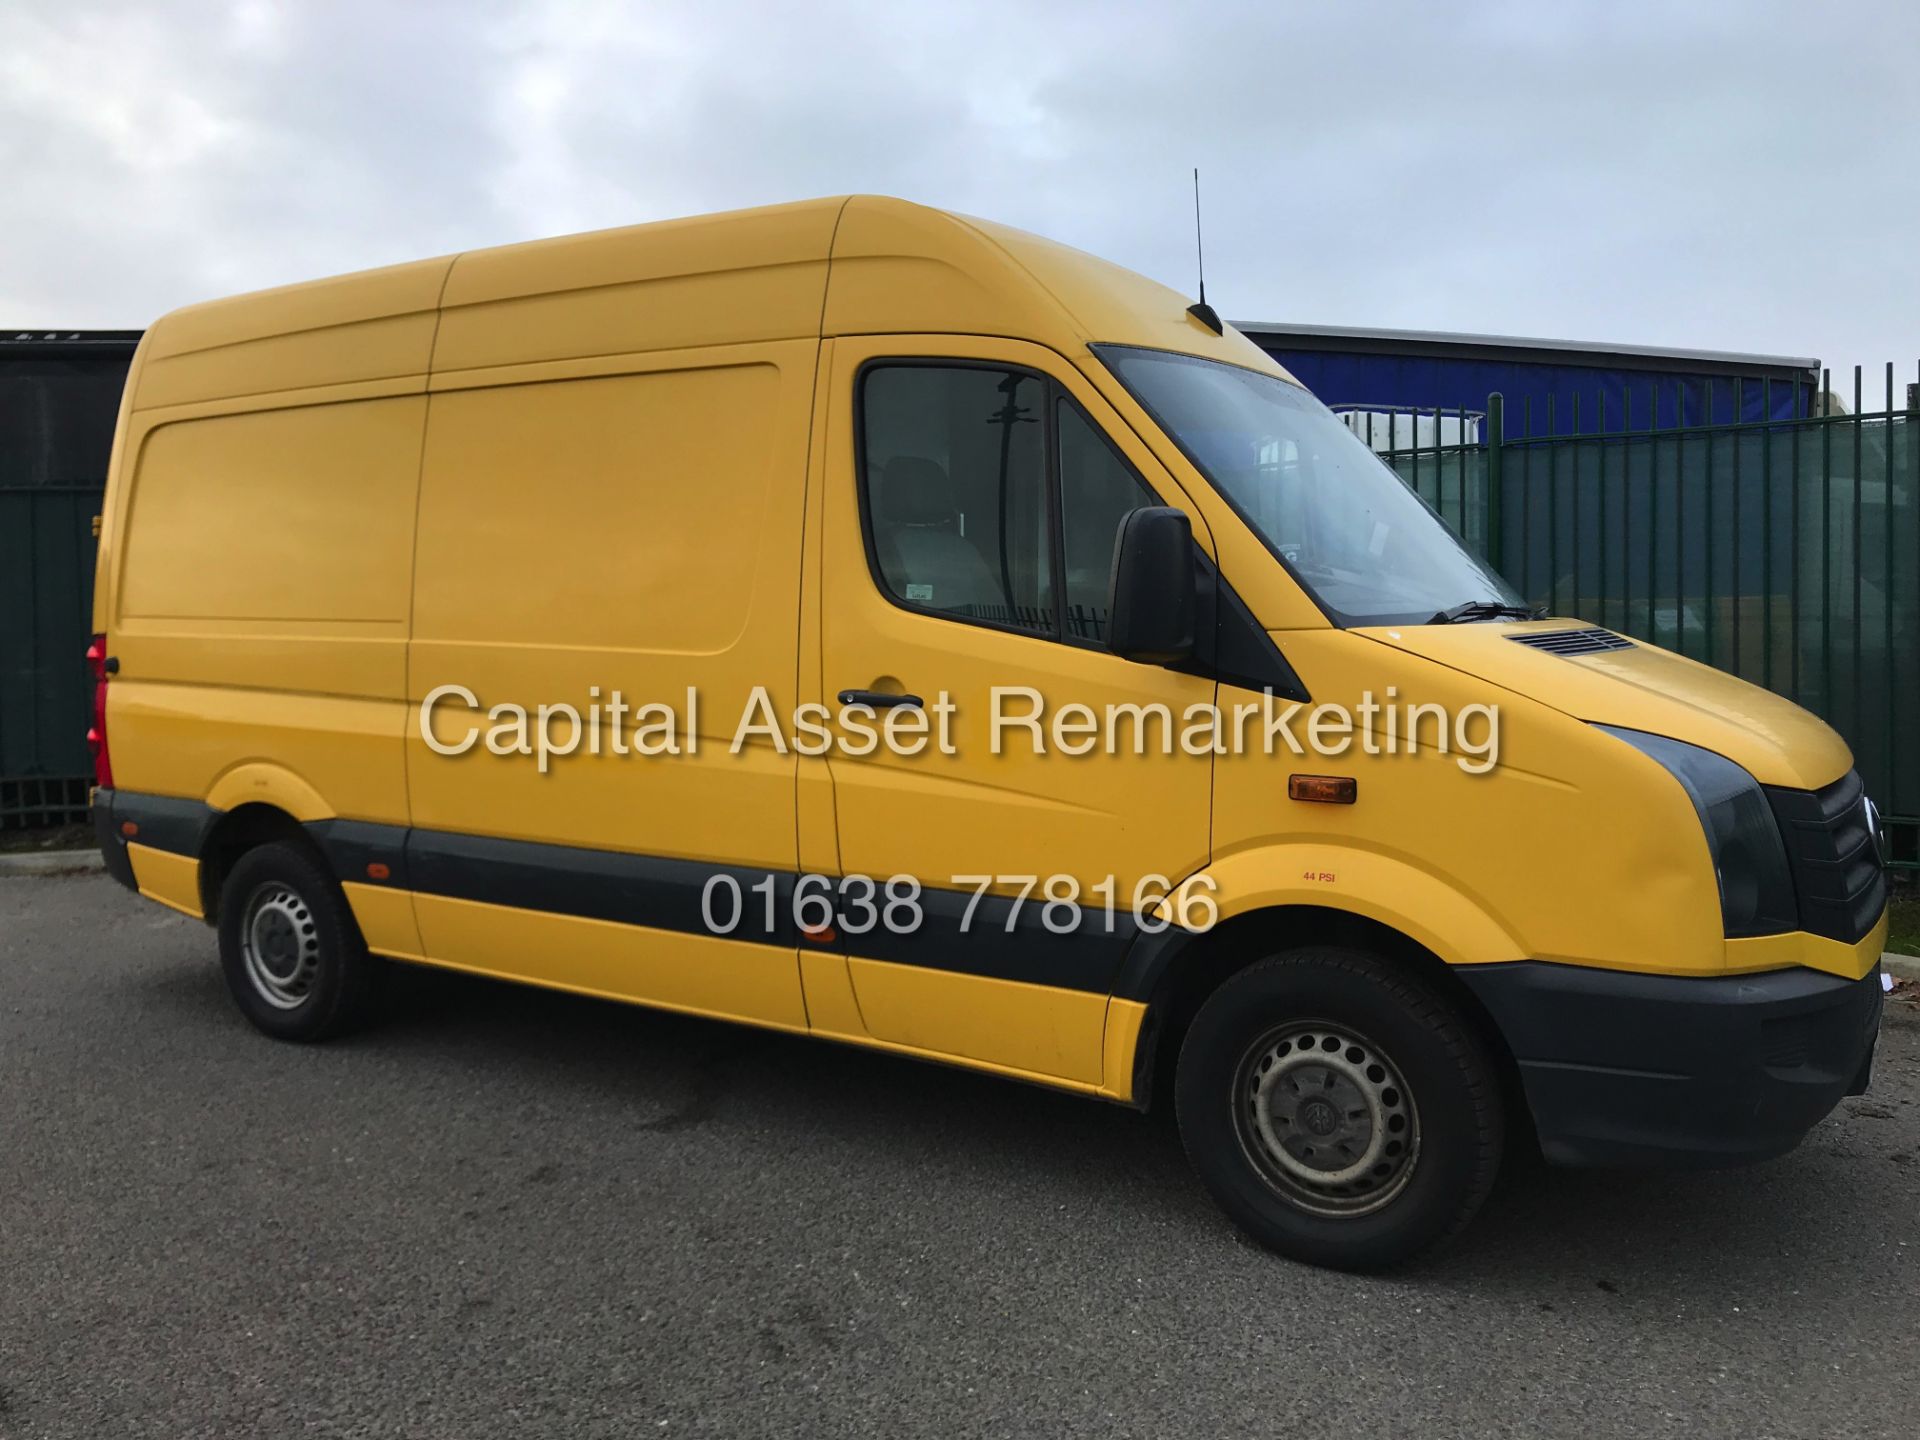 (On Sale) VOLKSWAGEN CRAFTER 2.0TDI CR35 "136BHP" MWB (2014 MODEL) 1 OWNER - AIR CON - FSH